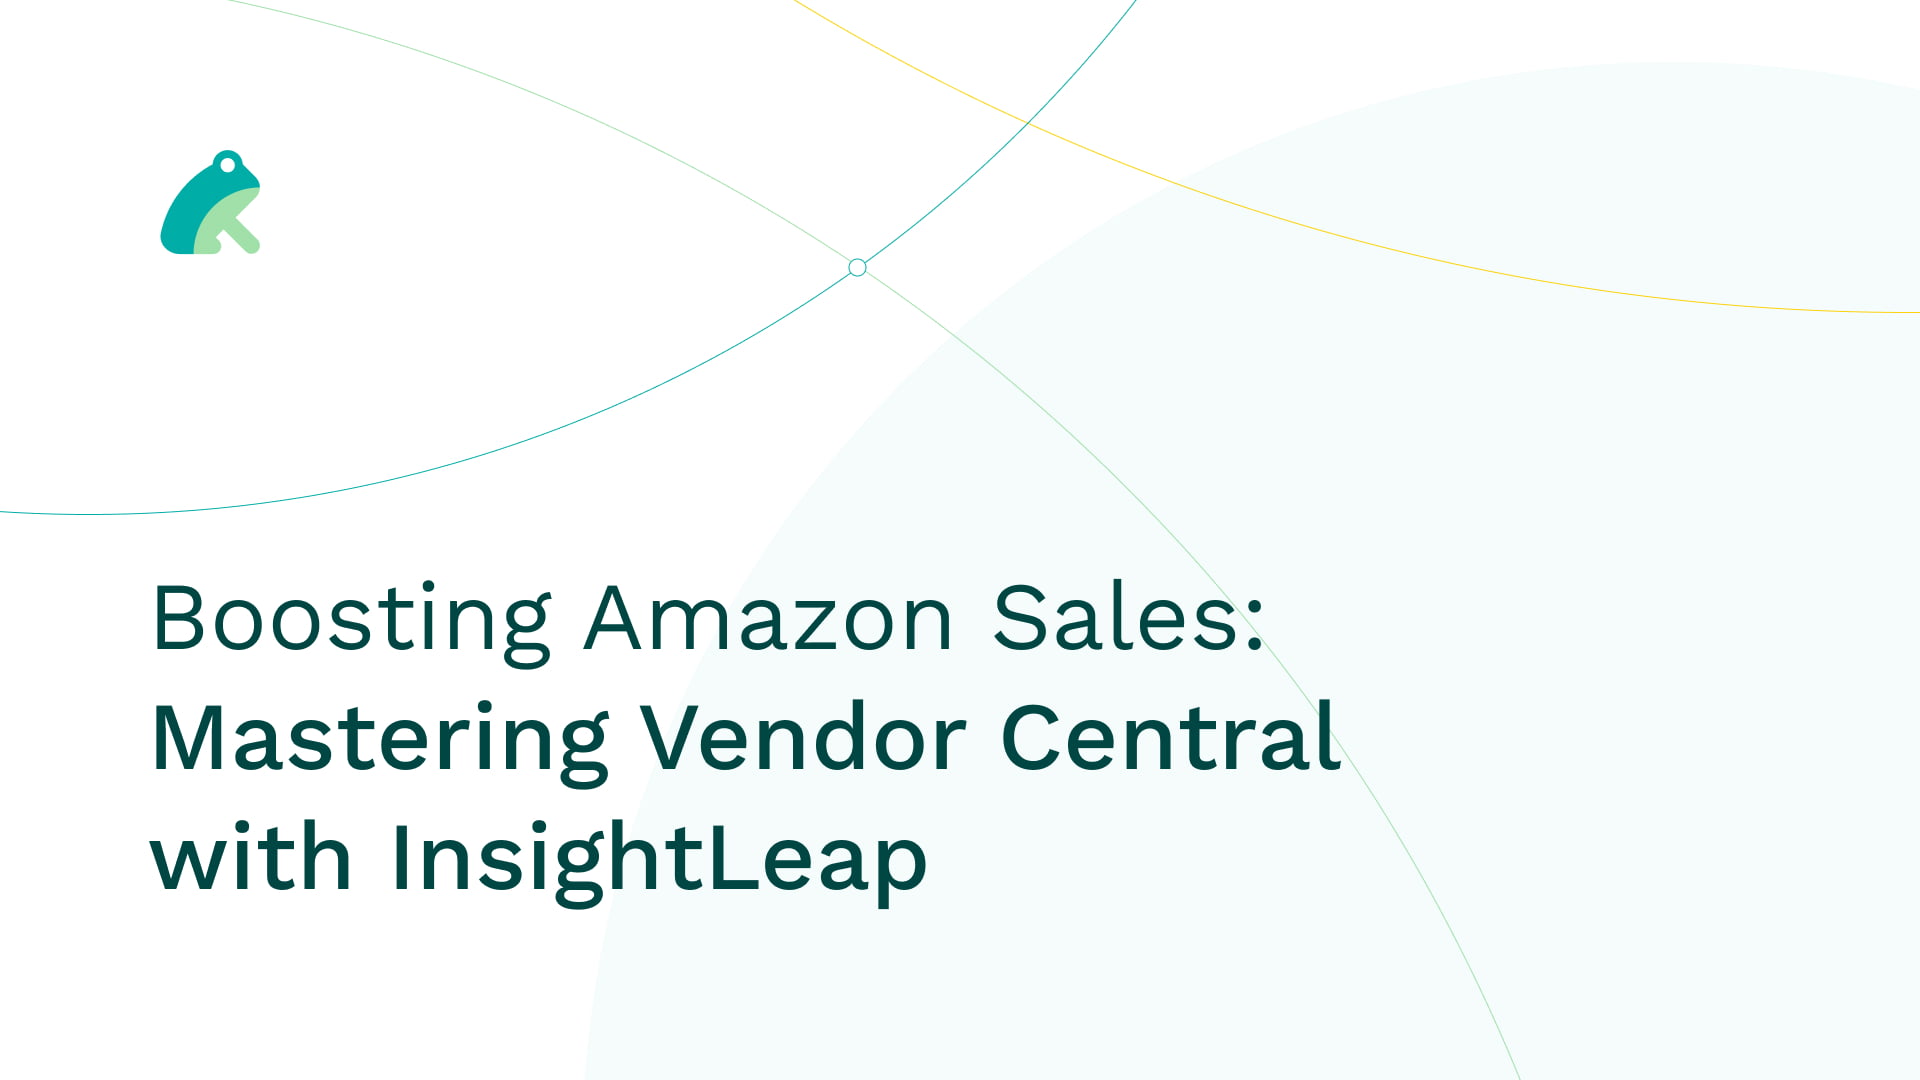 Boosting Amazon Sales: Mastering Vendor Central with InsightLeap